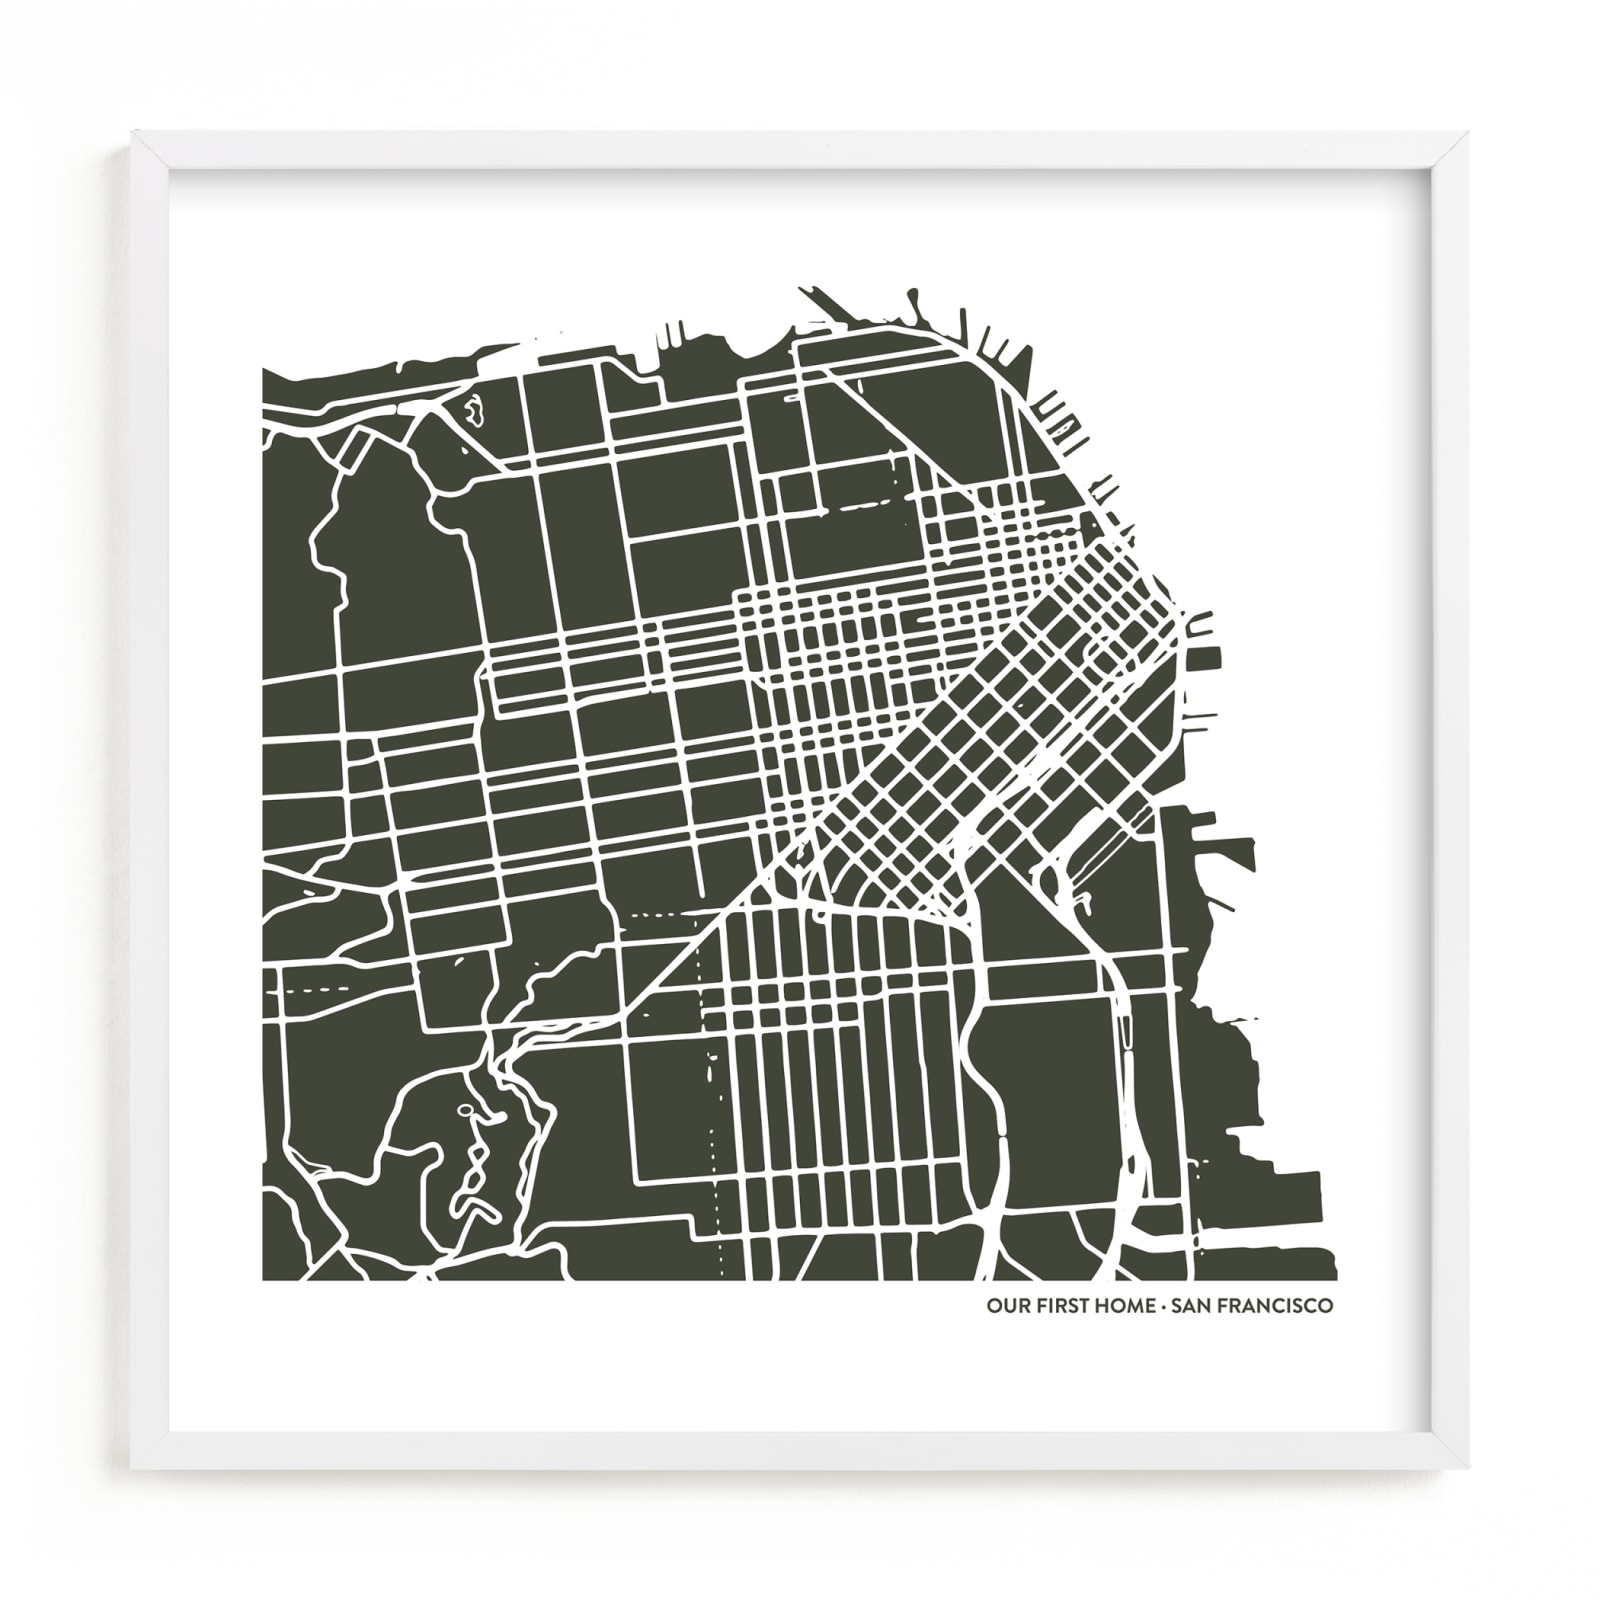 This is a green custom map printing by Minted called Custom Filled Map Art.